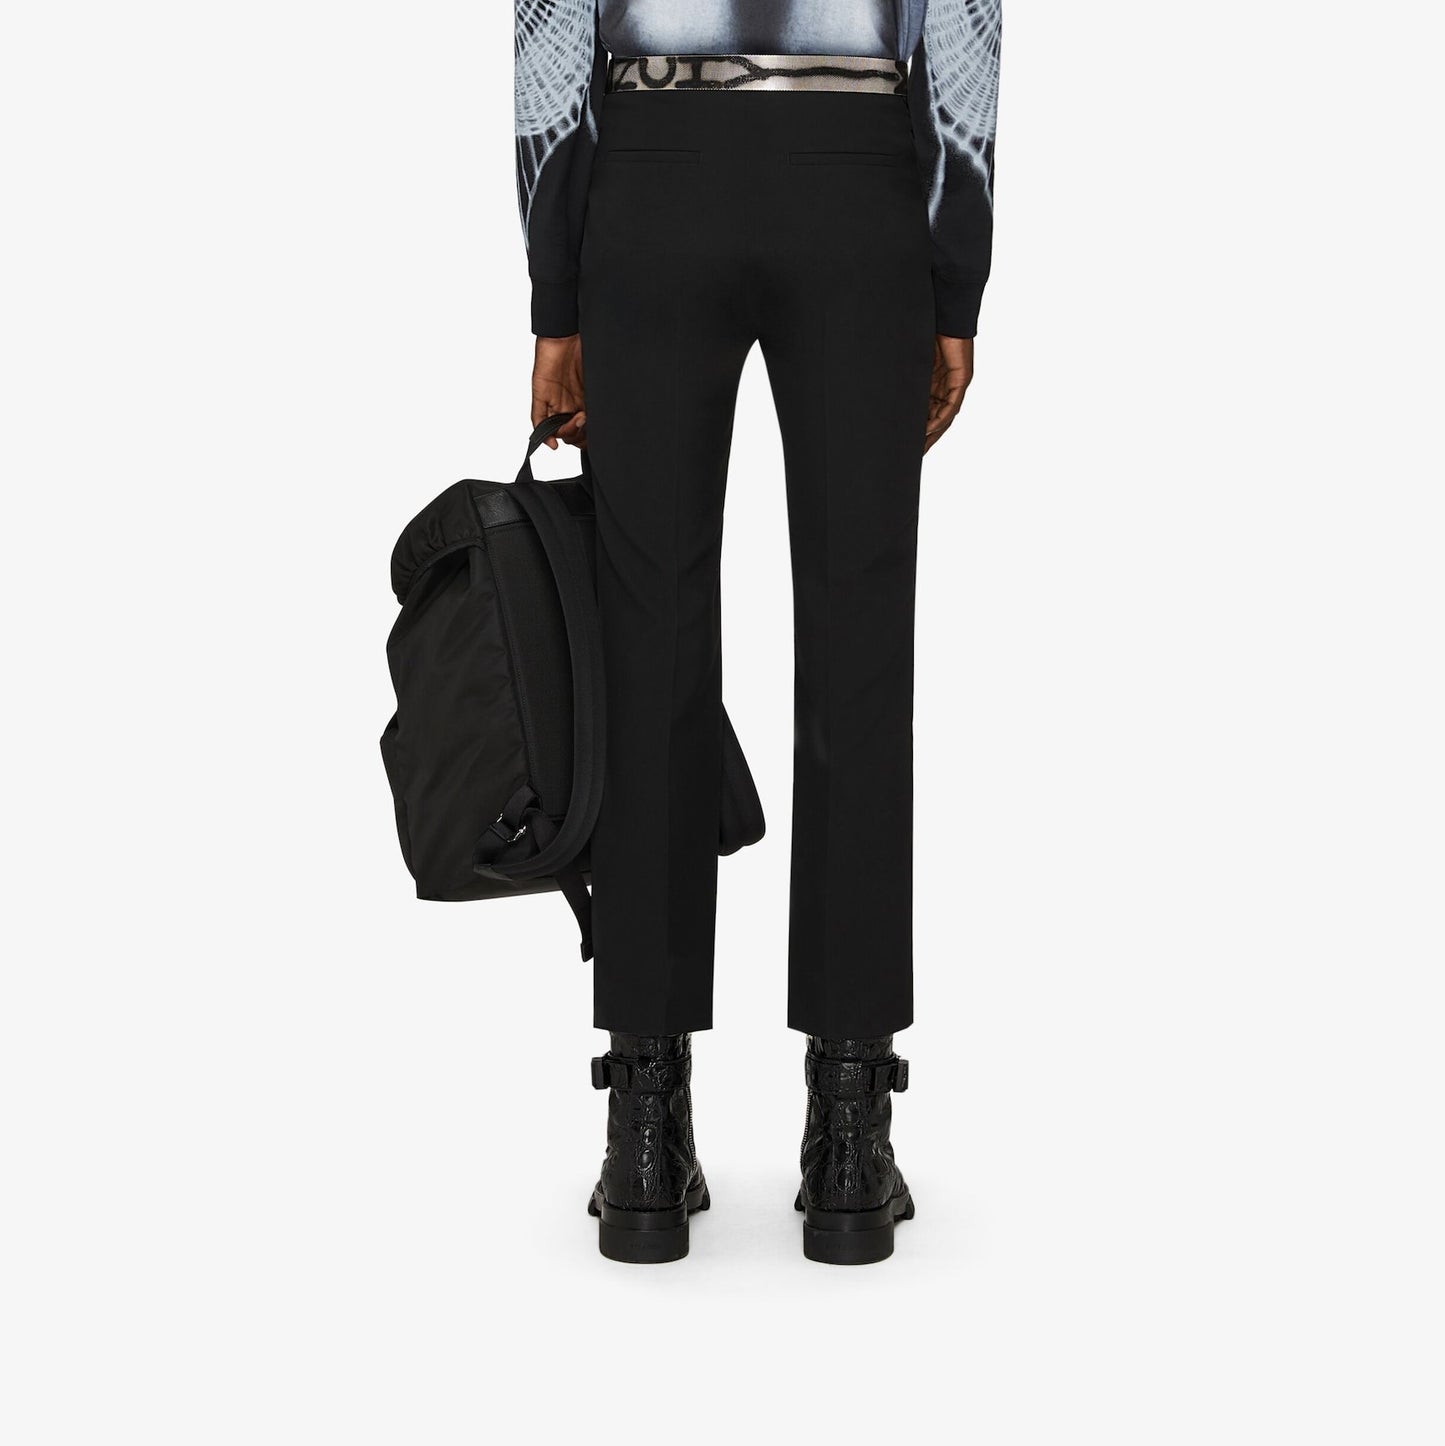 Black Cool Pants With Pockets At the Back